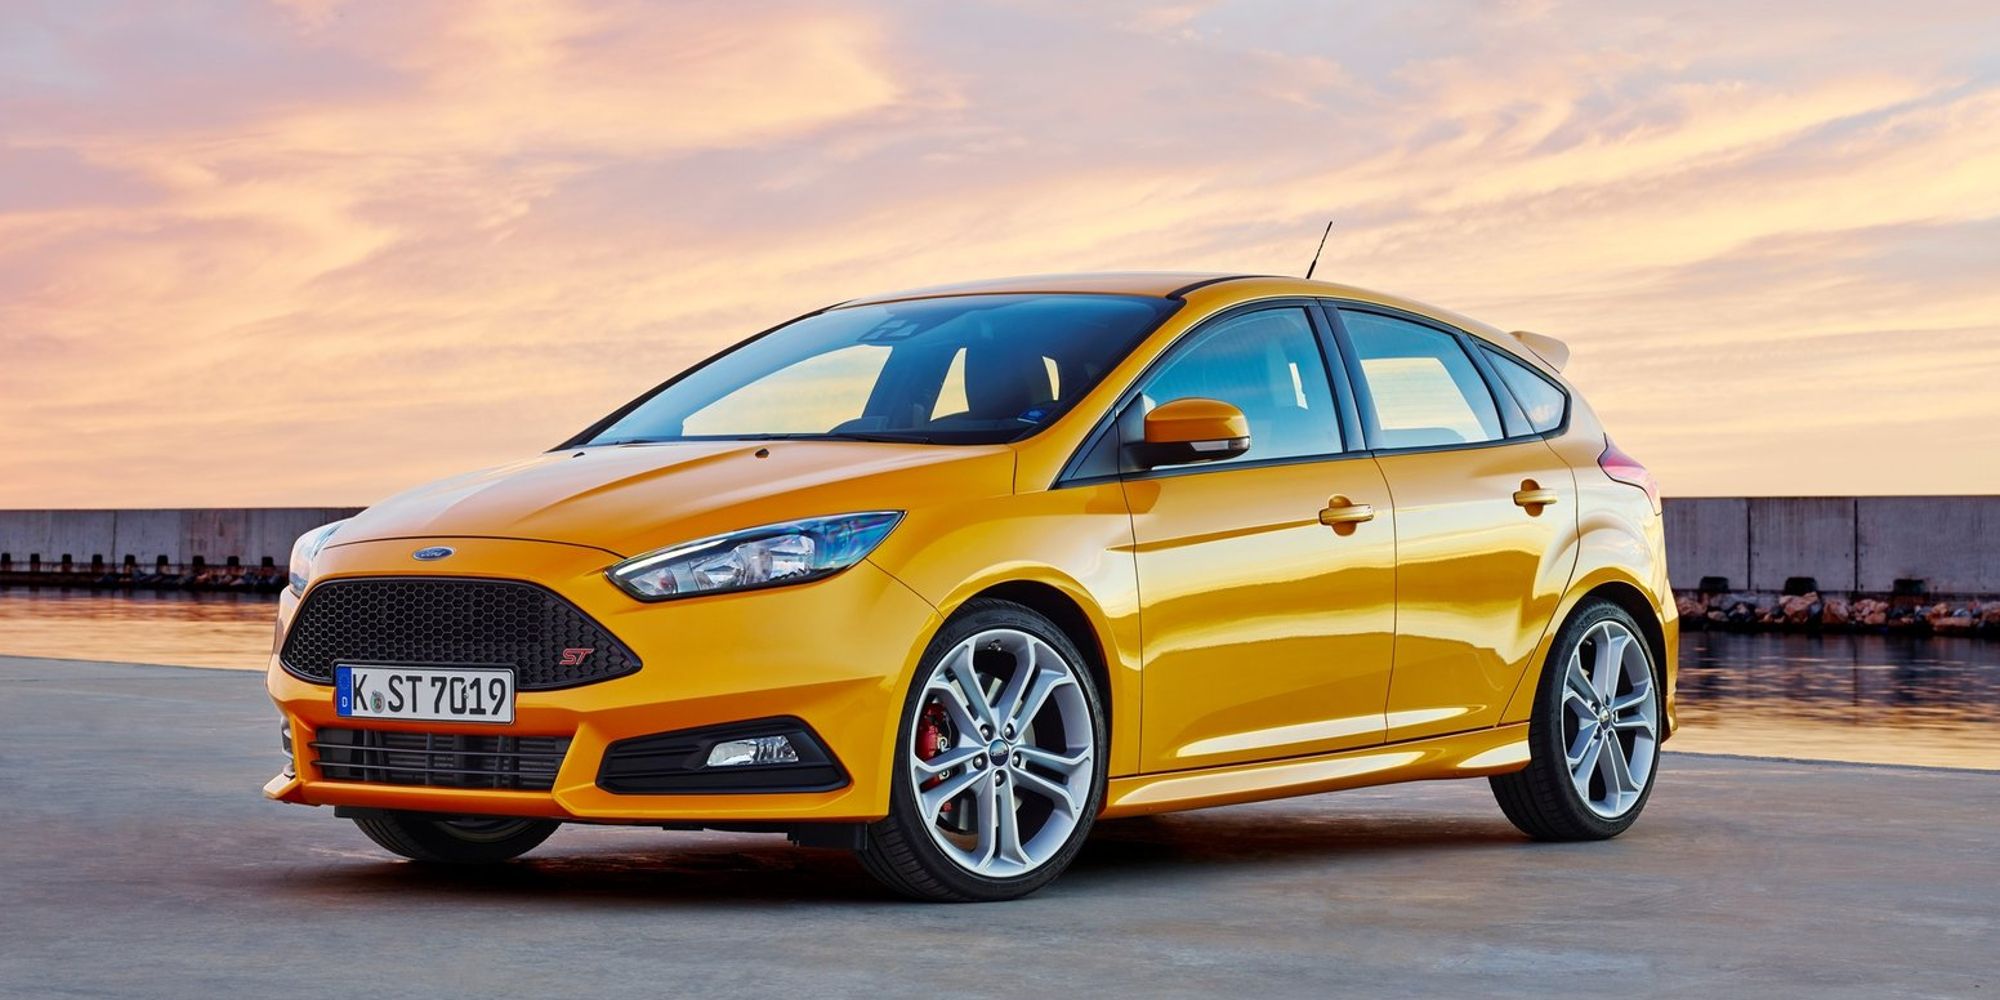 Front 3/4 view of the Focus ST (facelift)